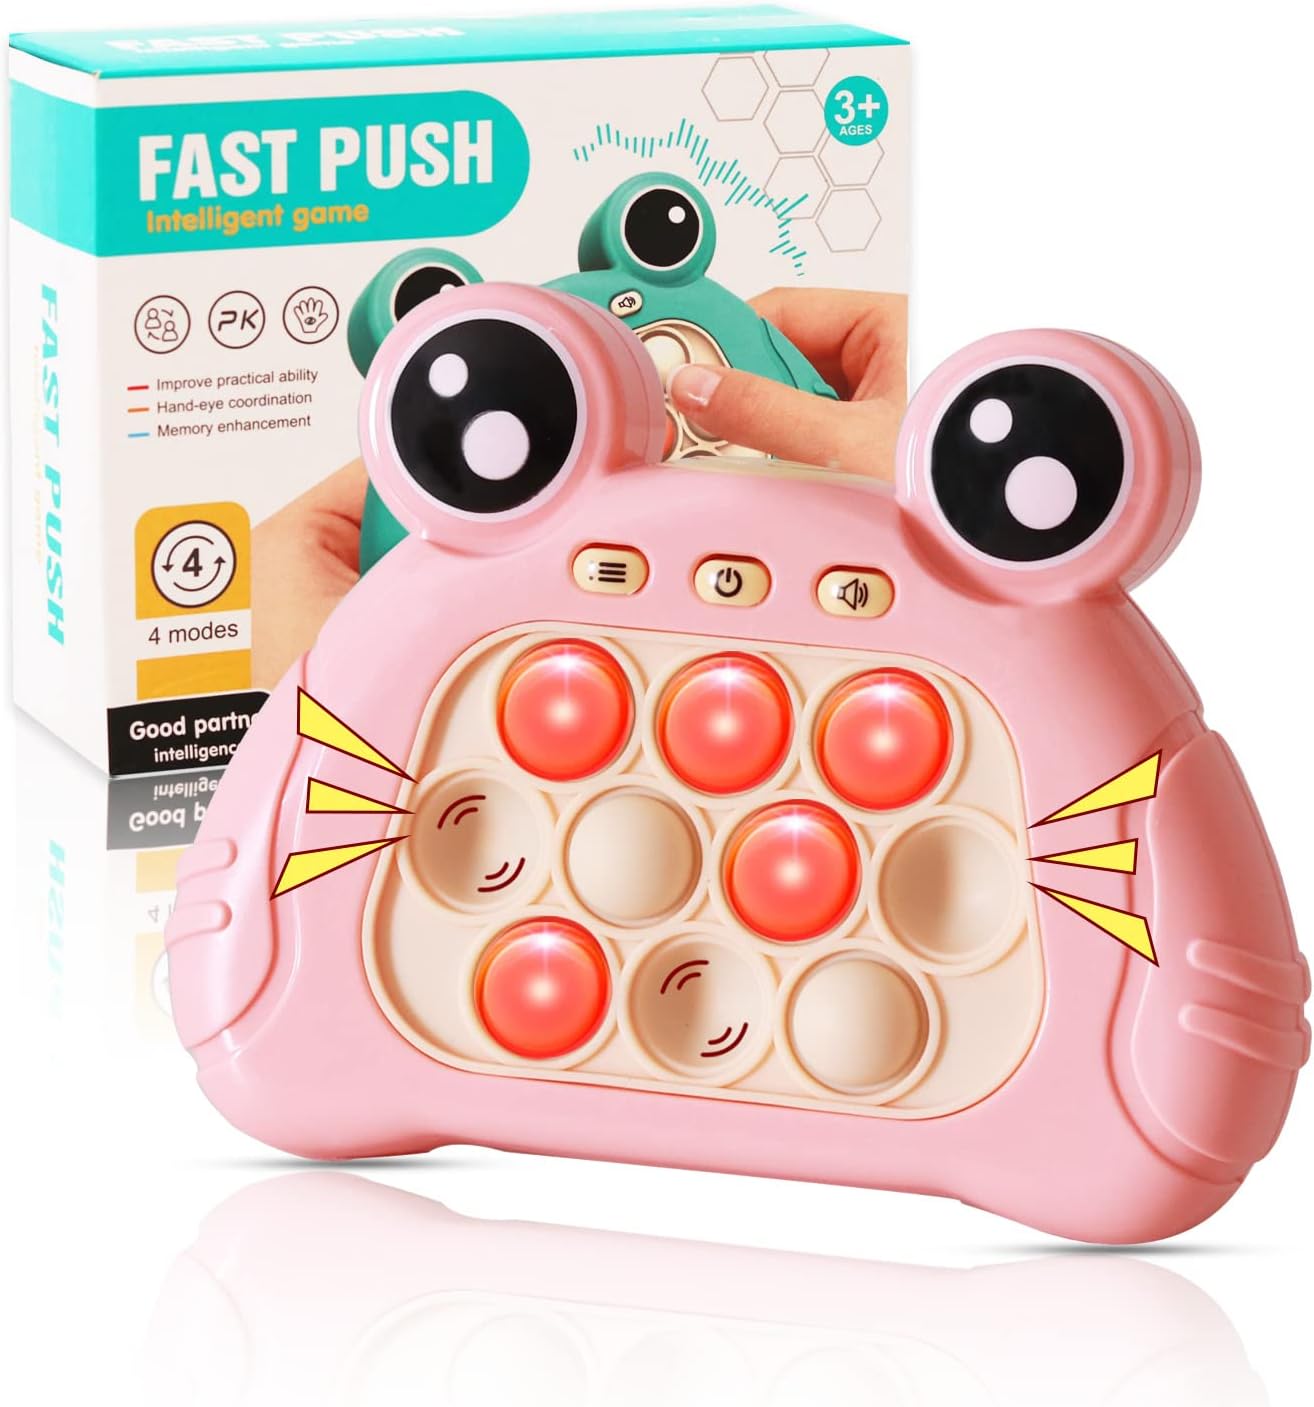 Fast Push Intelligent Toy for kids, Popit Fidget Toy,Pop it, Pop up, Memory Building Game, Stress Buster Toy, Fidget Toy - pink